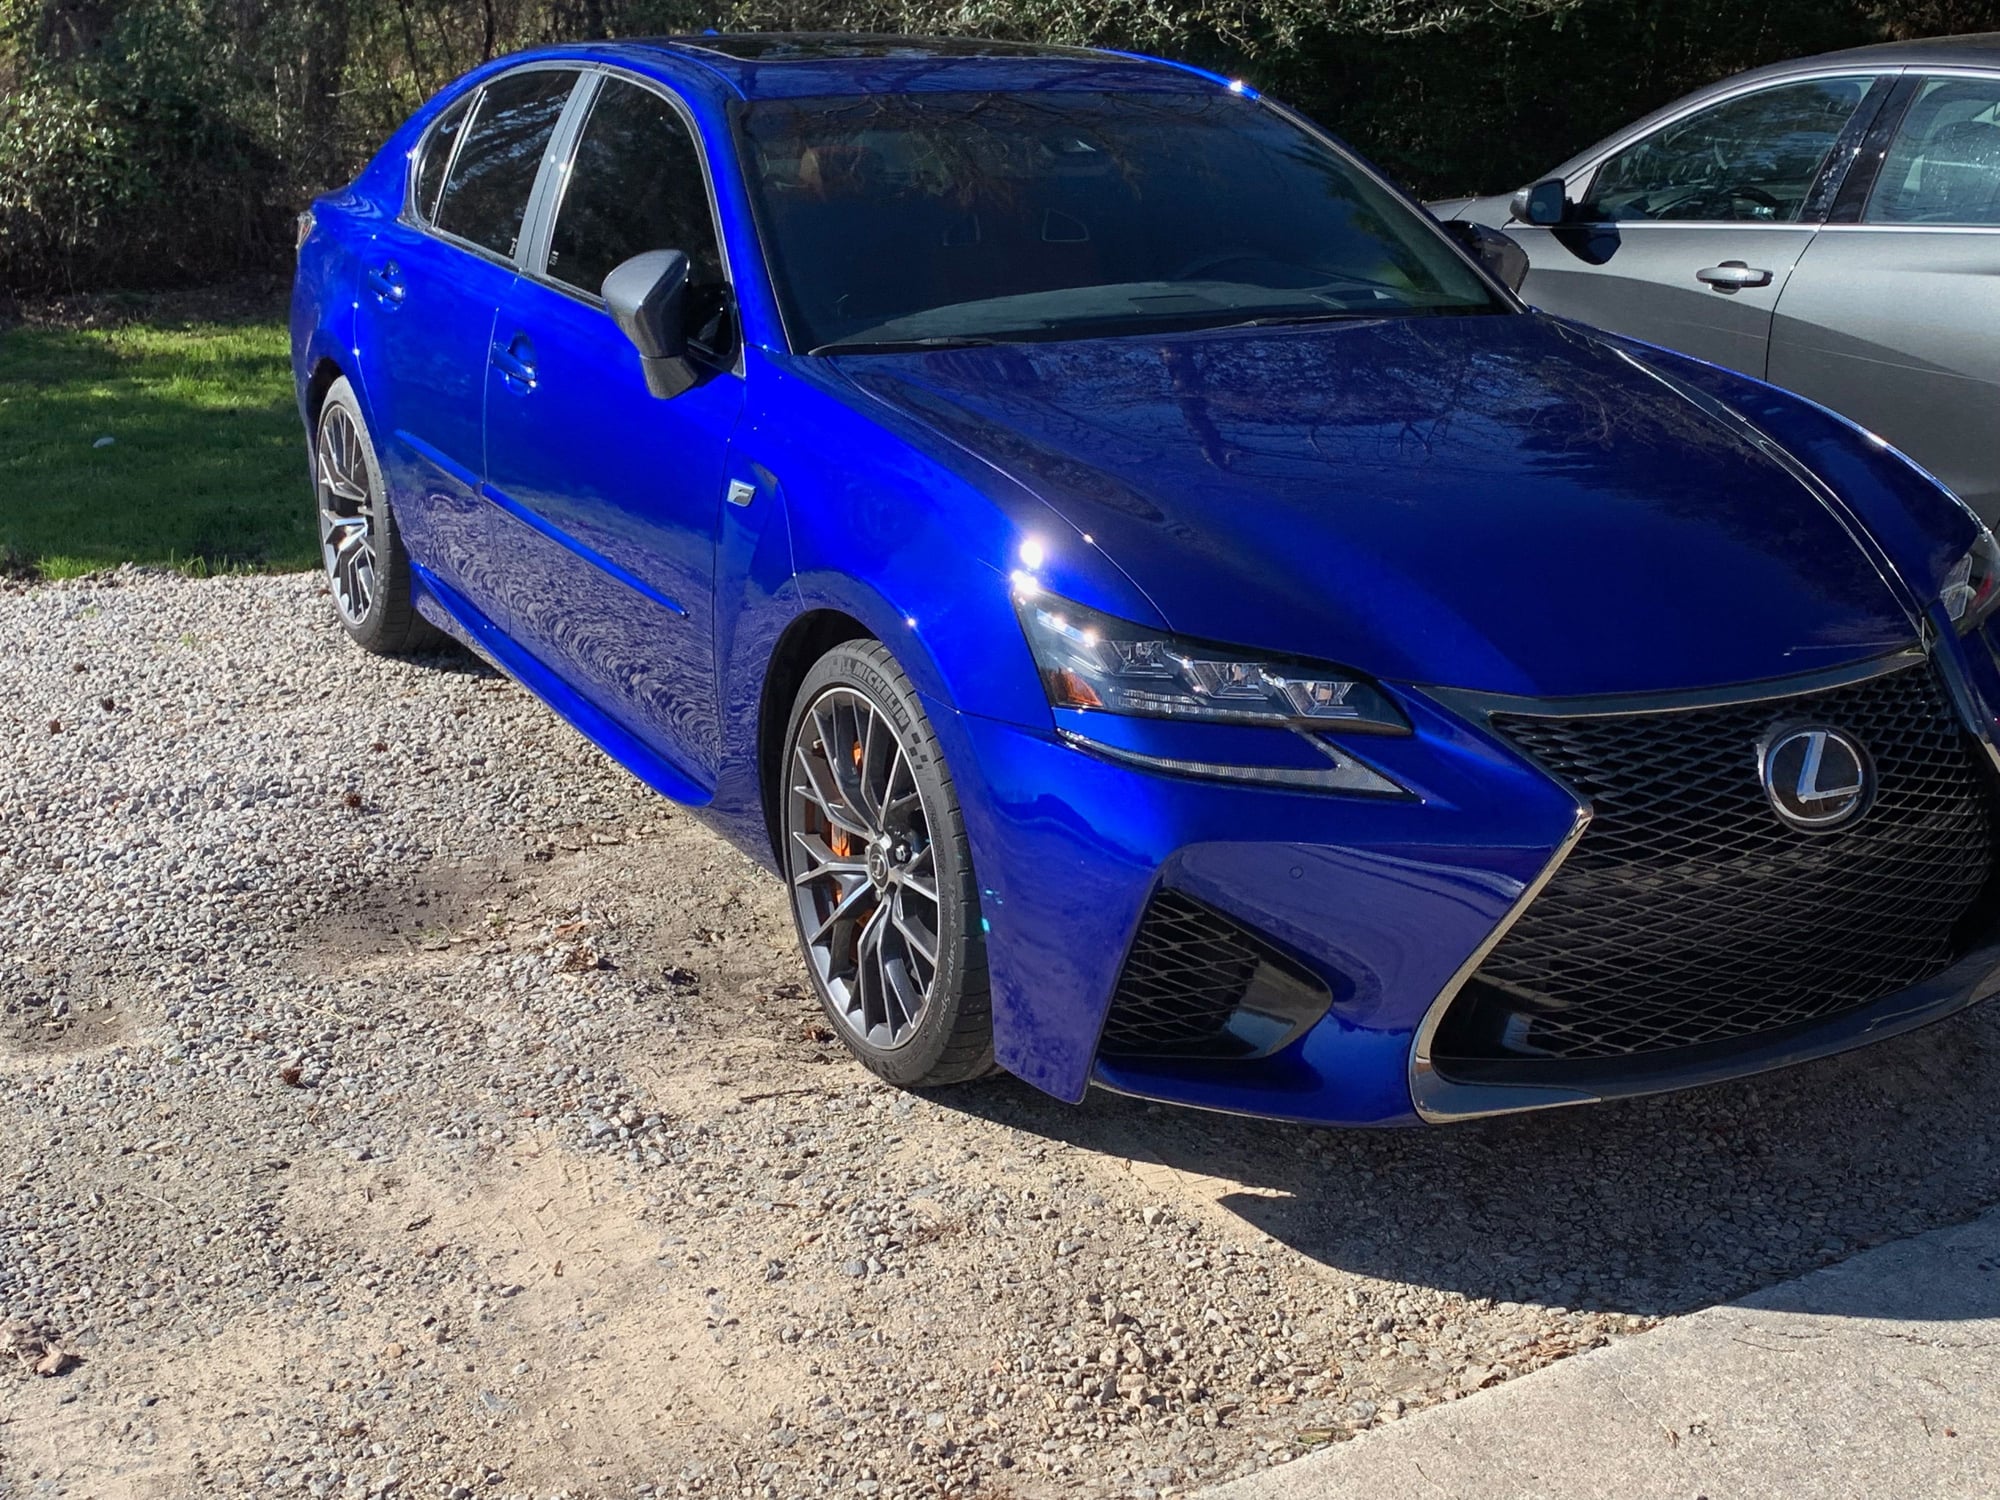 to Club Lexus! GSF owner roll call & member